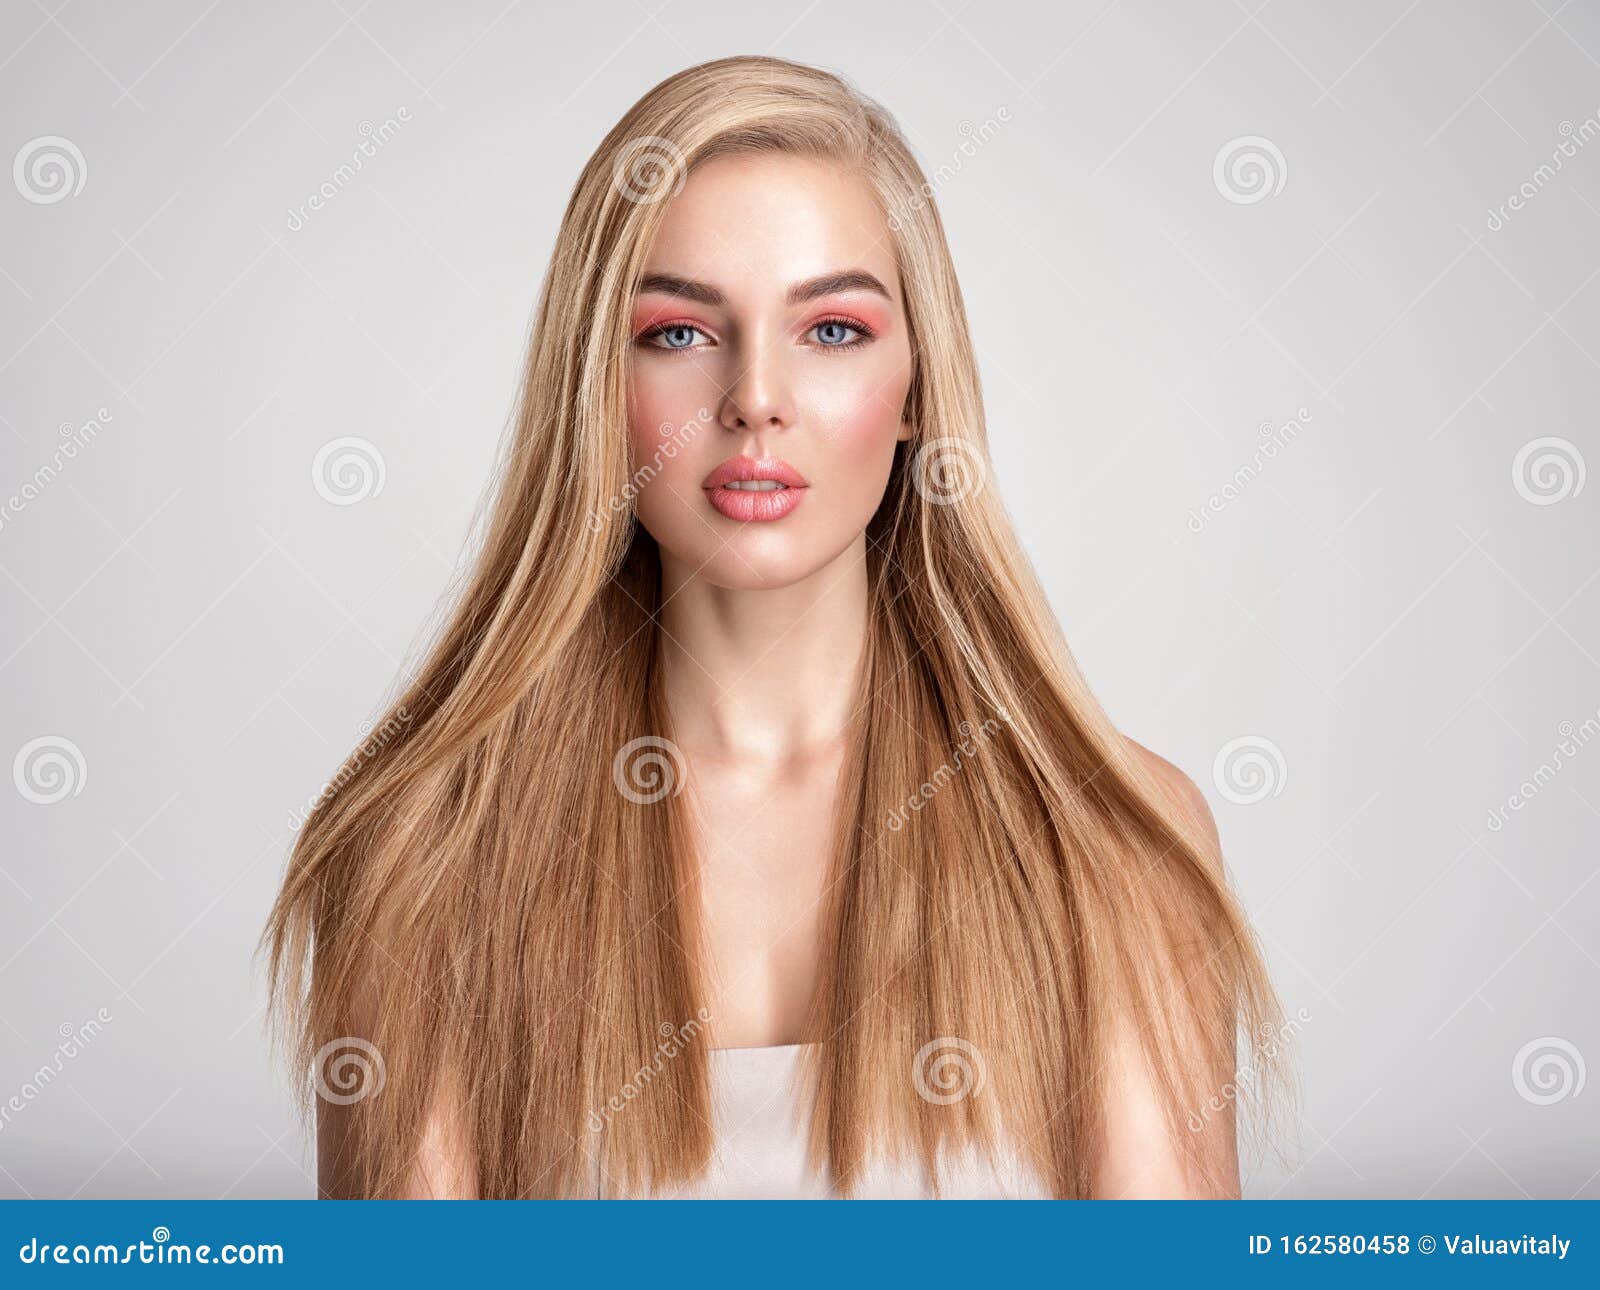 Blonde Woman with Straight Hair - wide 10